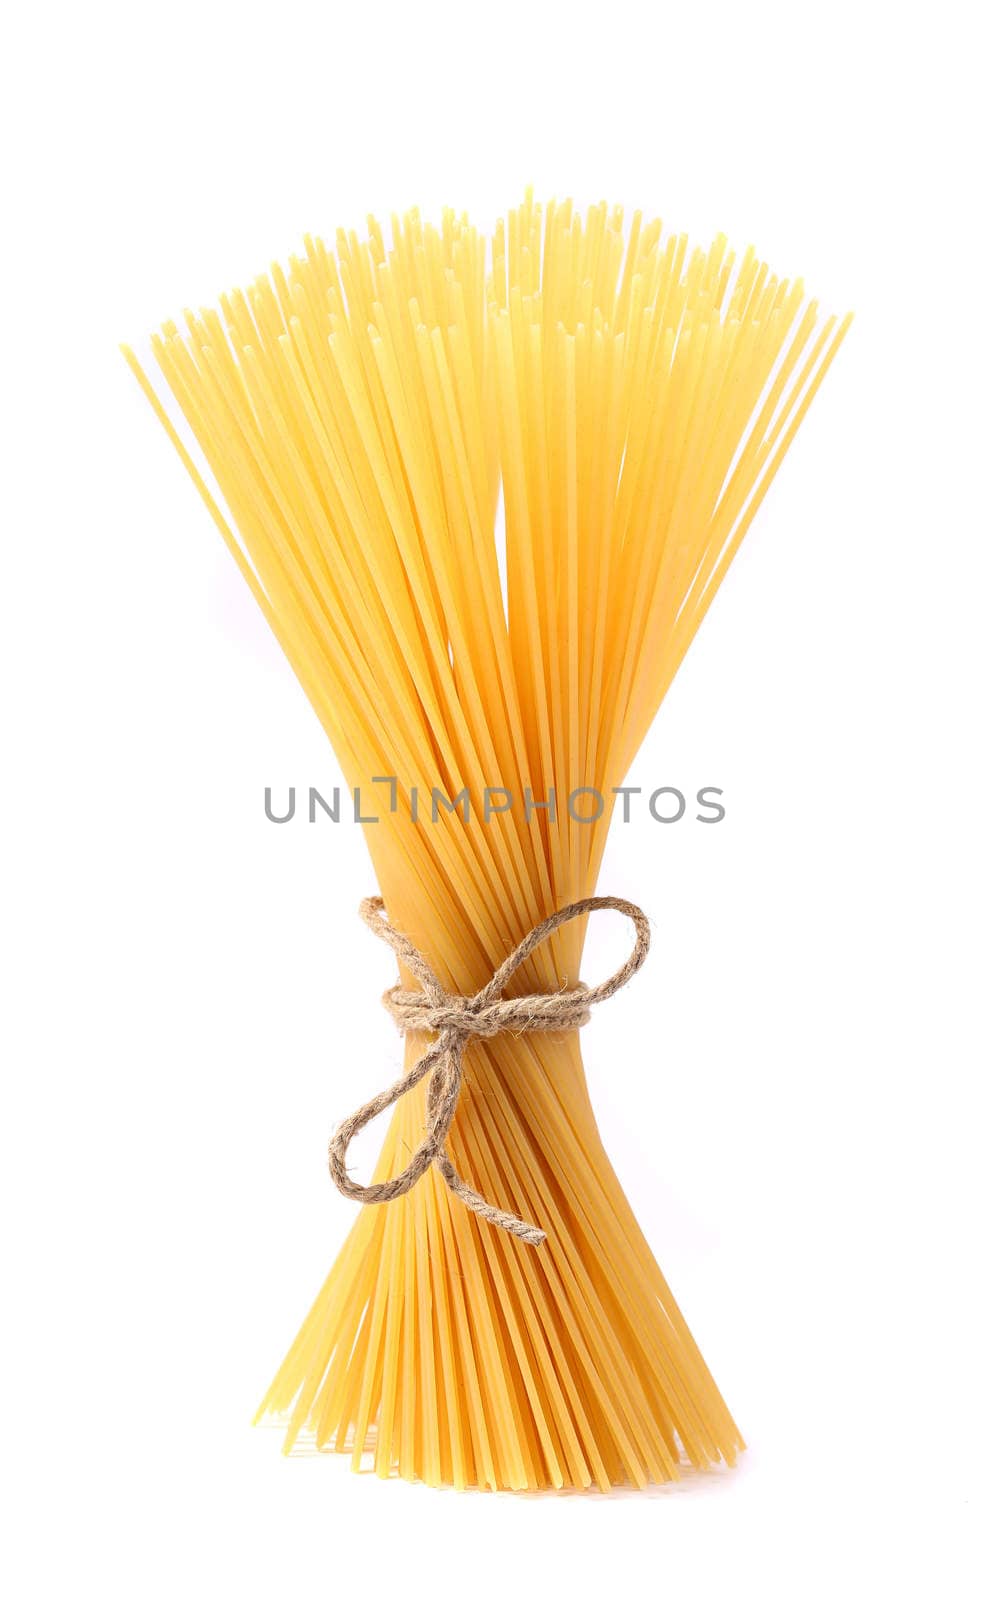 Close up of Spaghetti isolated by indigolotos